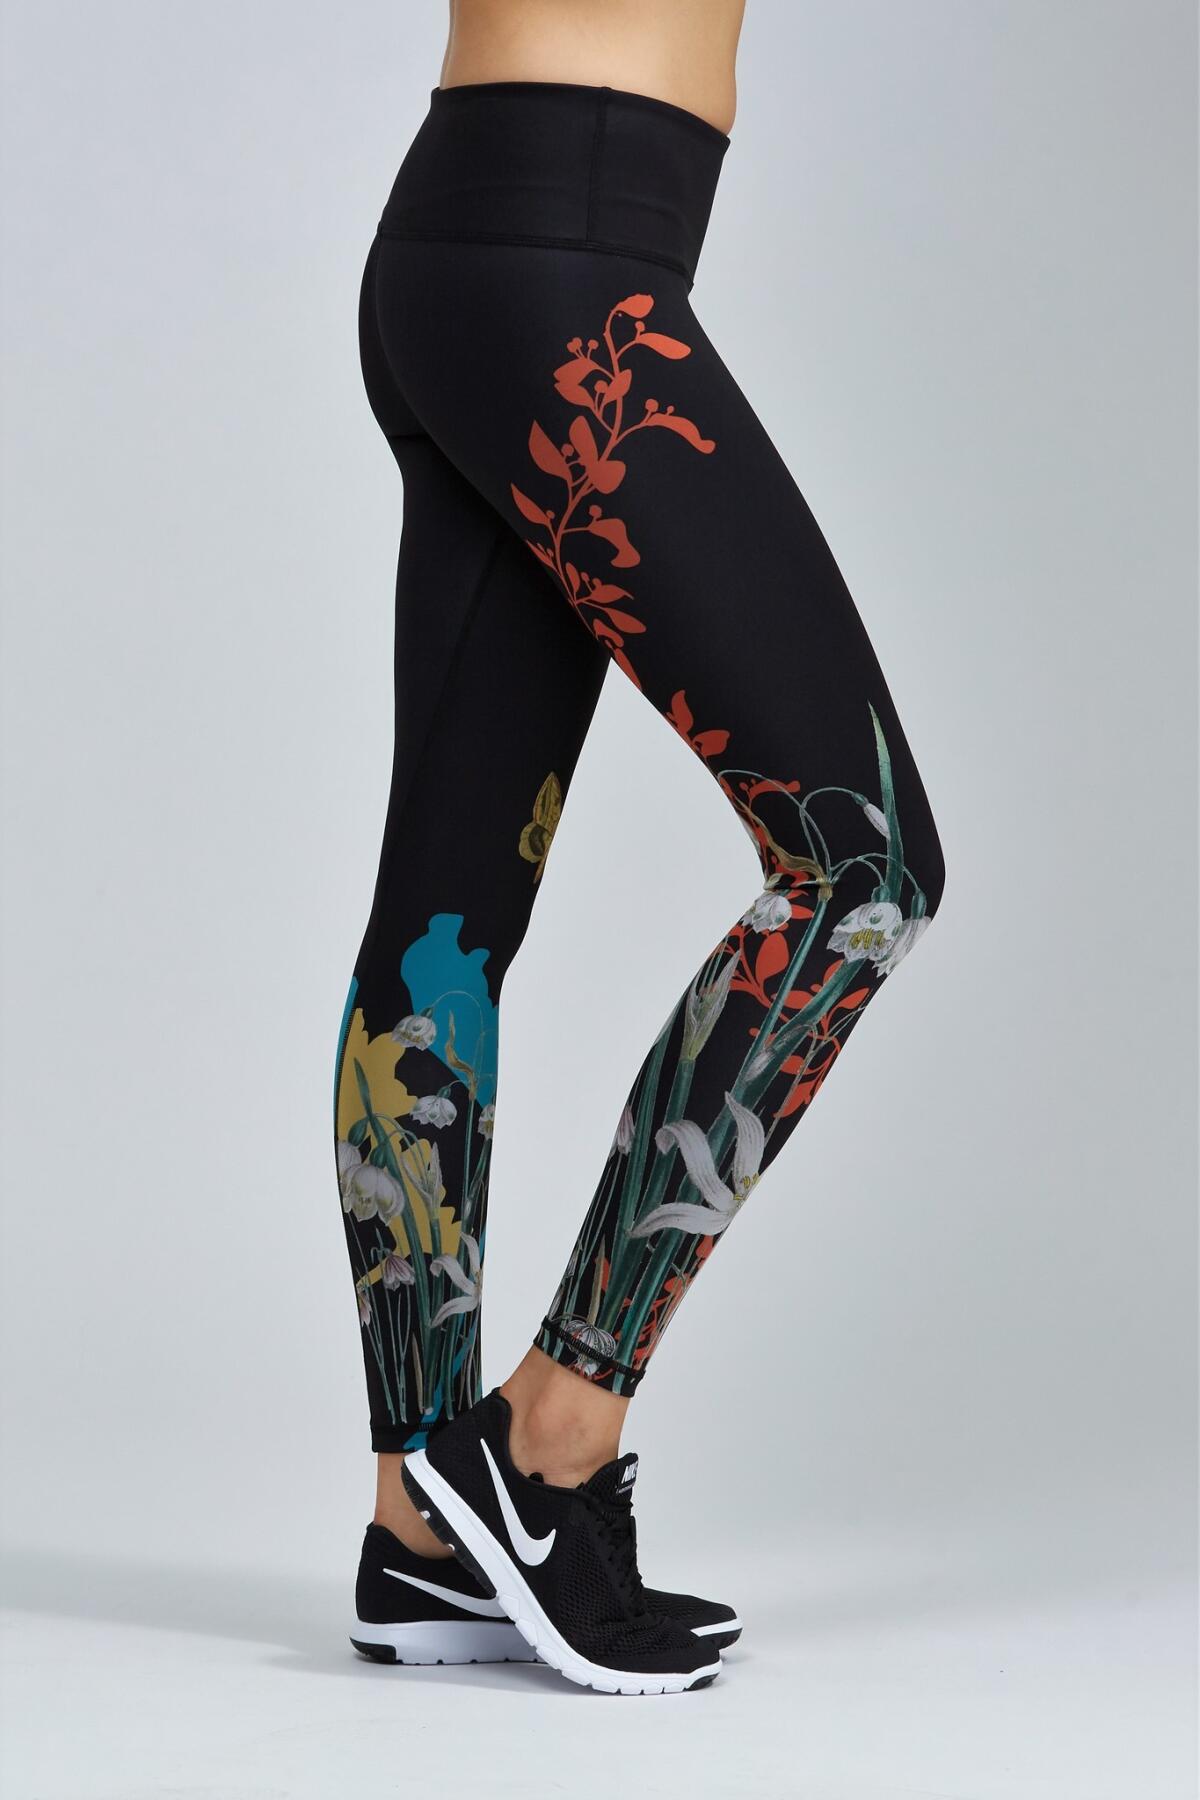 How to wear leggings in fall: These legging models are trendy and